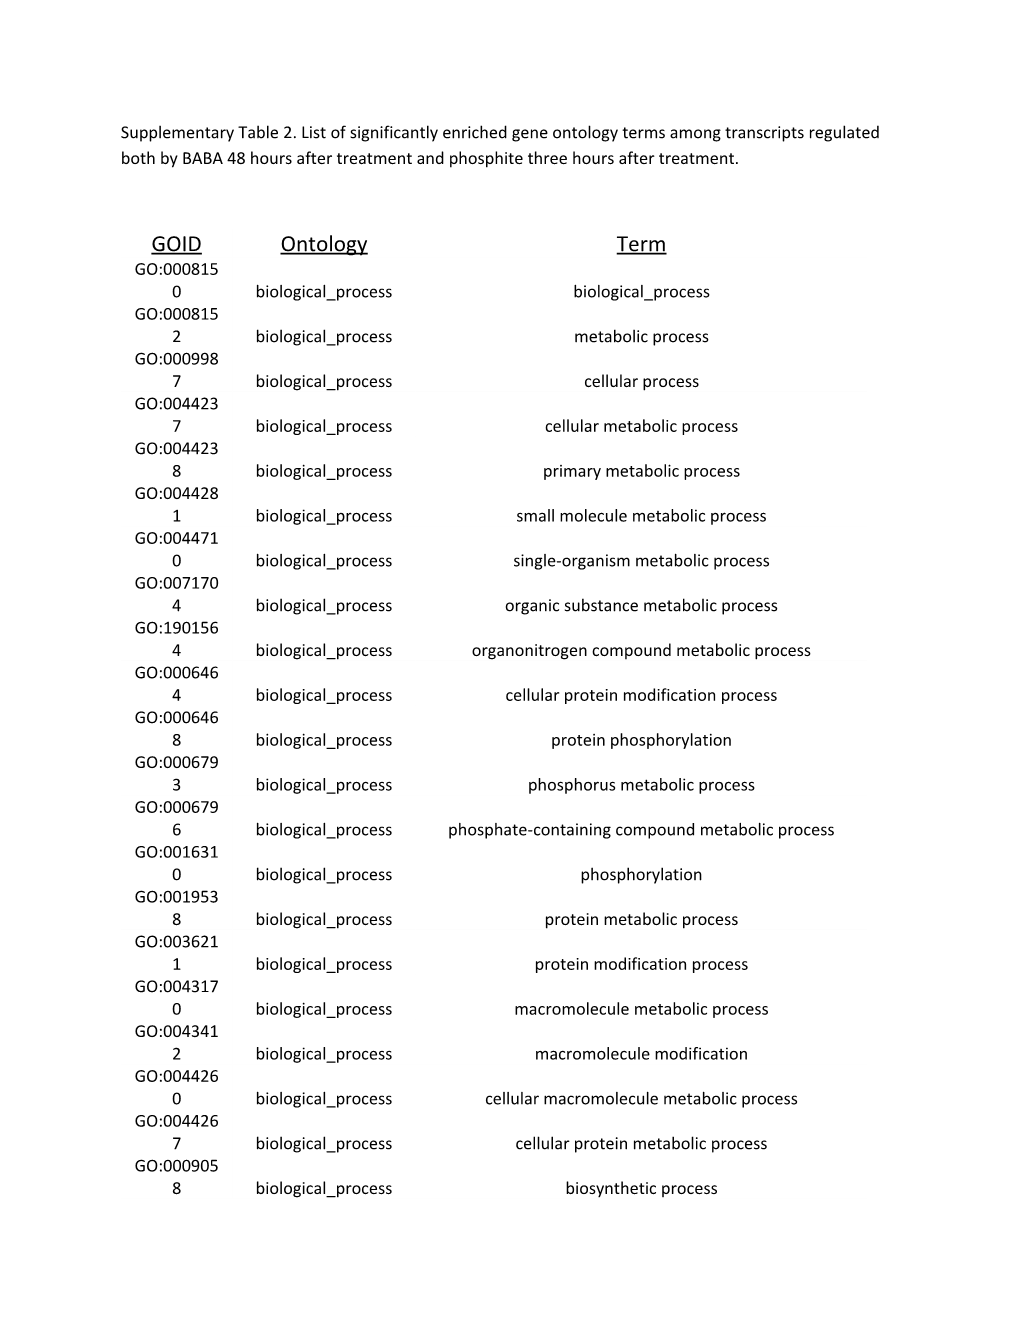 Supplementary Table 2. List of Significantly Enriched Gene Ontology Terms Among Transcripts